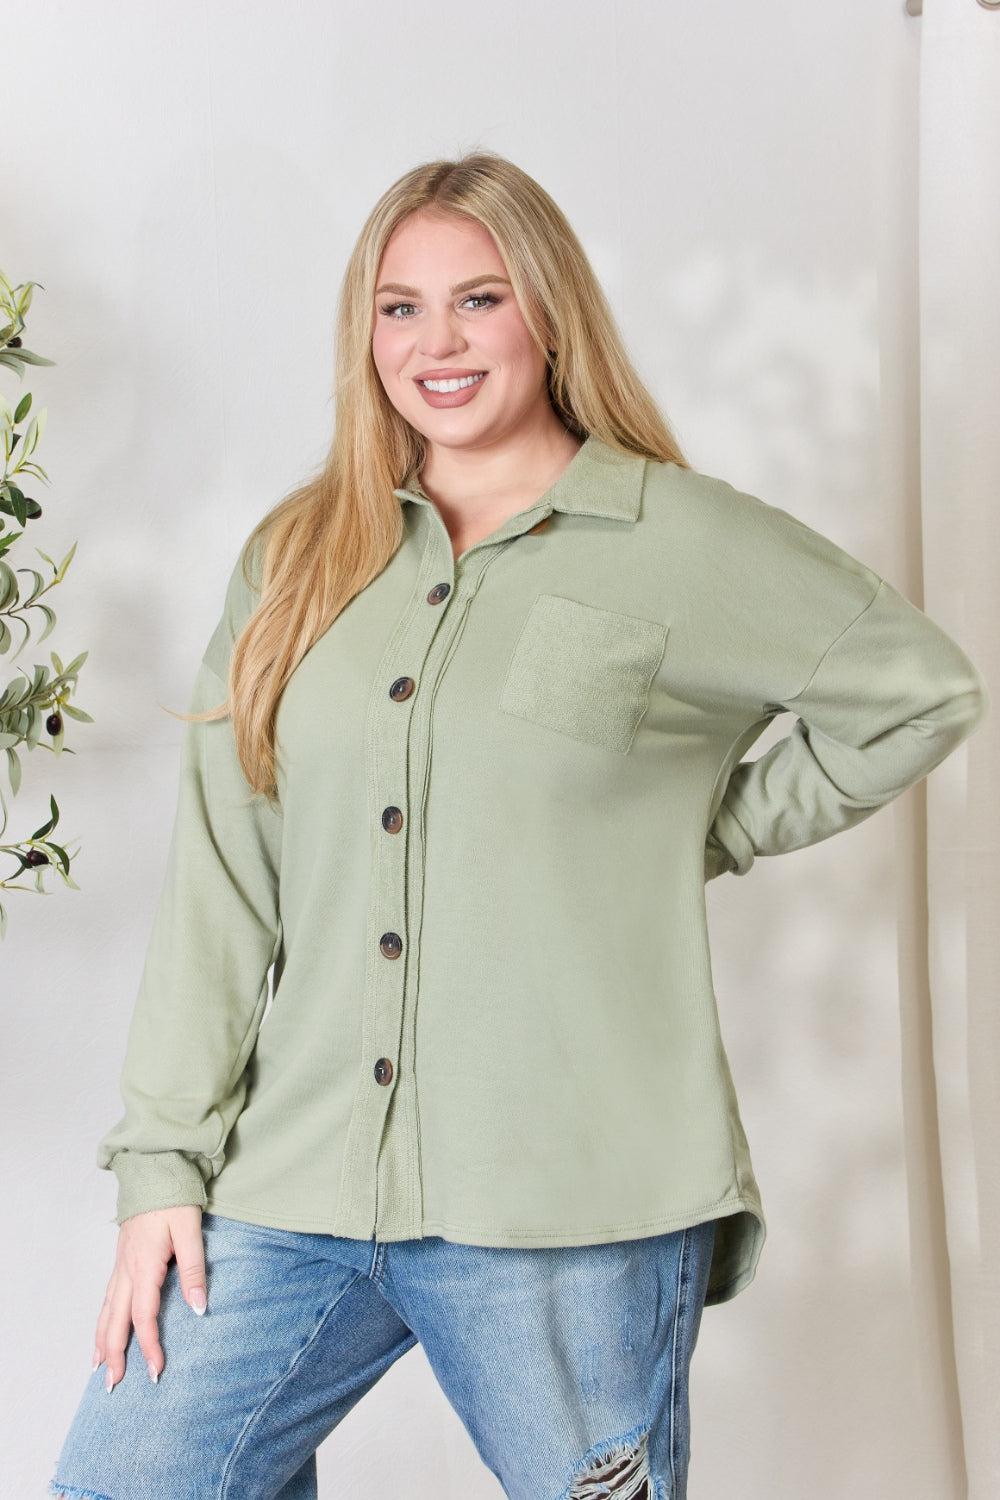 a woman wearing a green shirt and ripped jeans